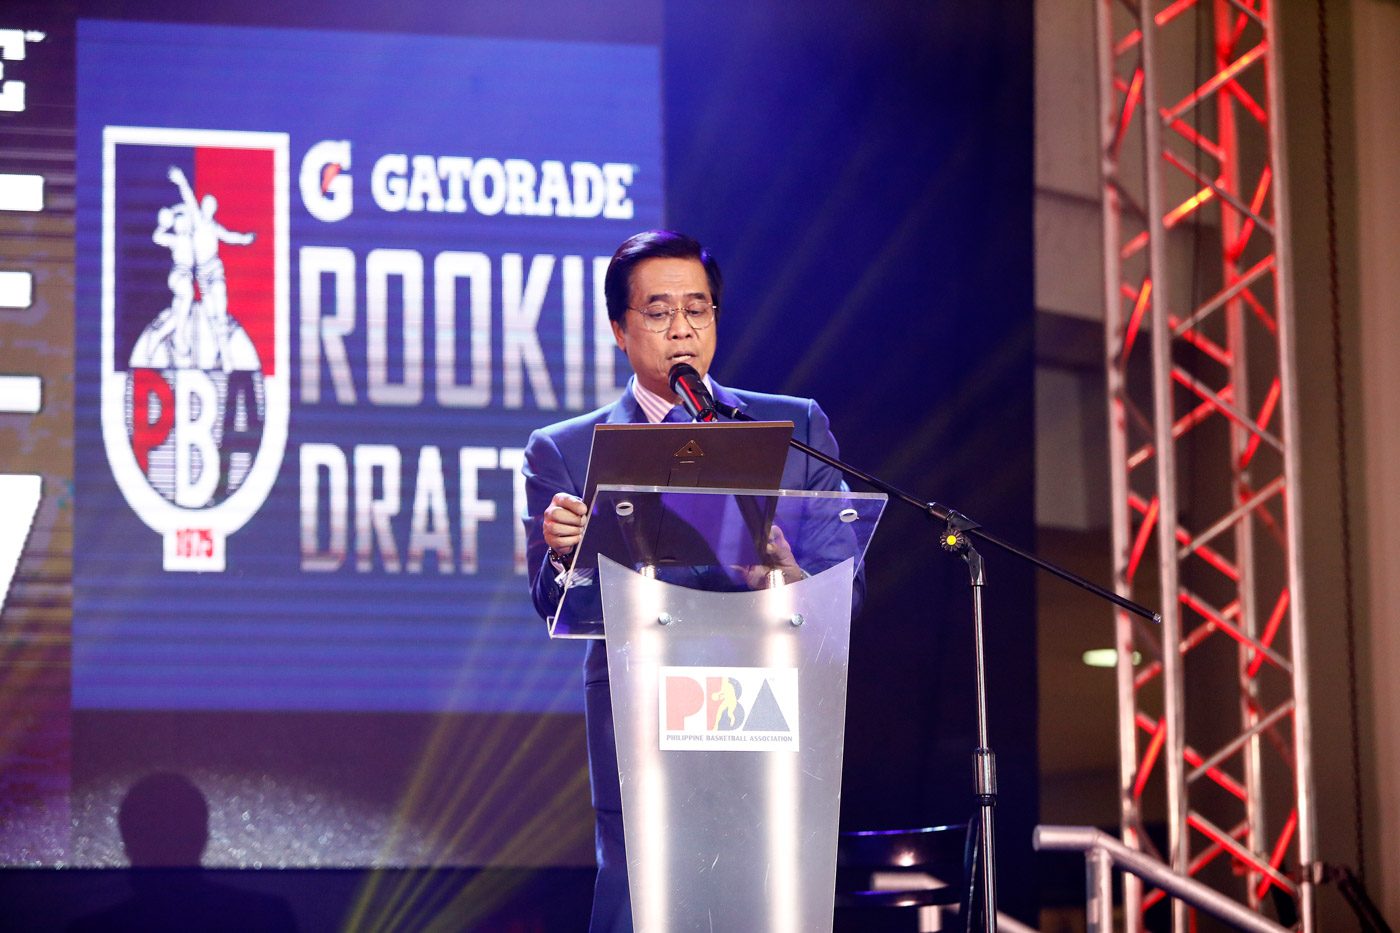 Chito Narvasa ready to step down as PBA commissioner if proper procedures followed